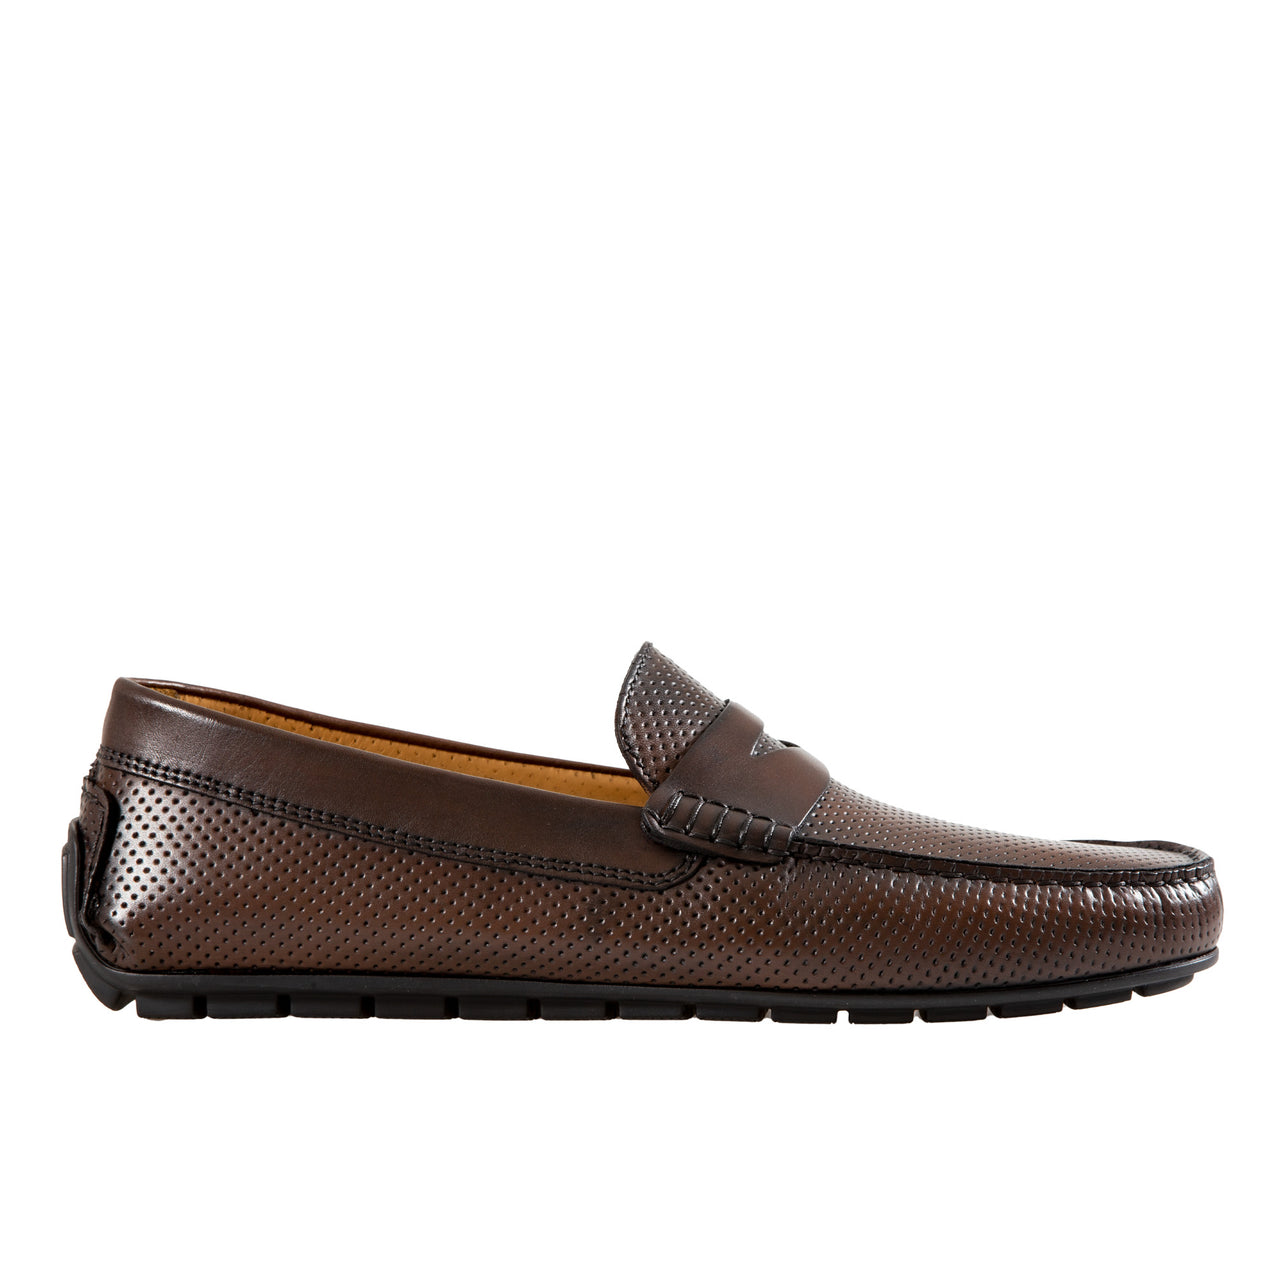 HENRY SARTORIAL Calf Driving Shoes with Leather Trim BROWN